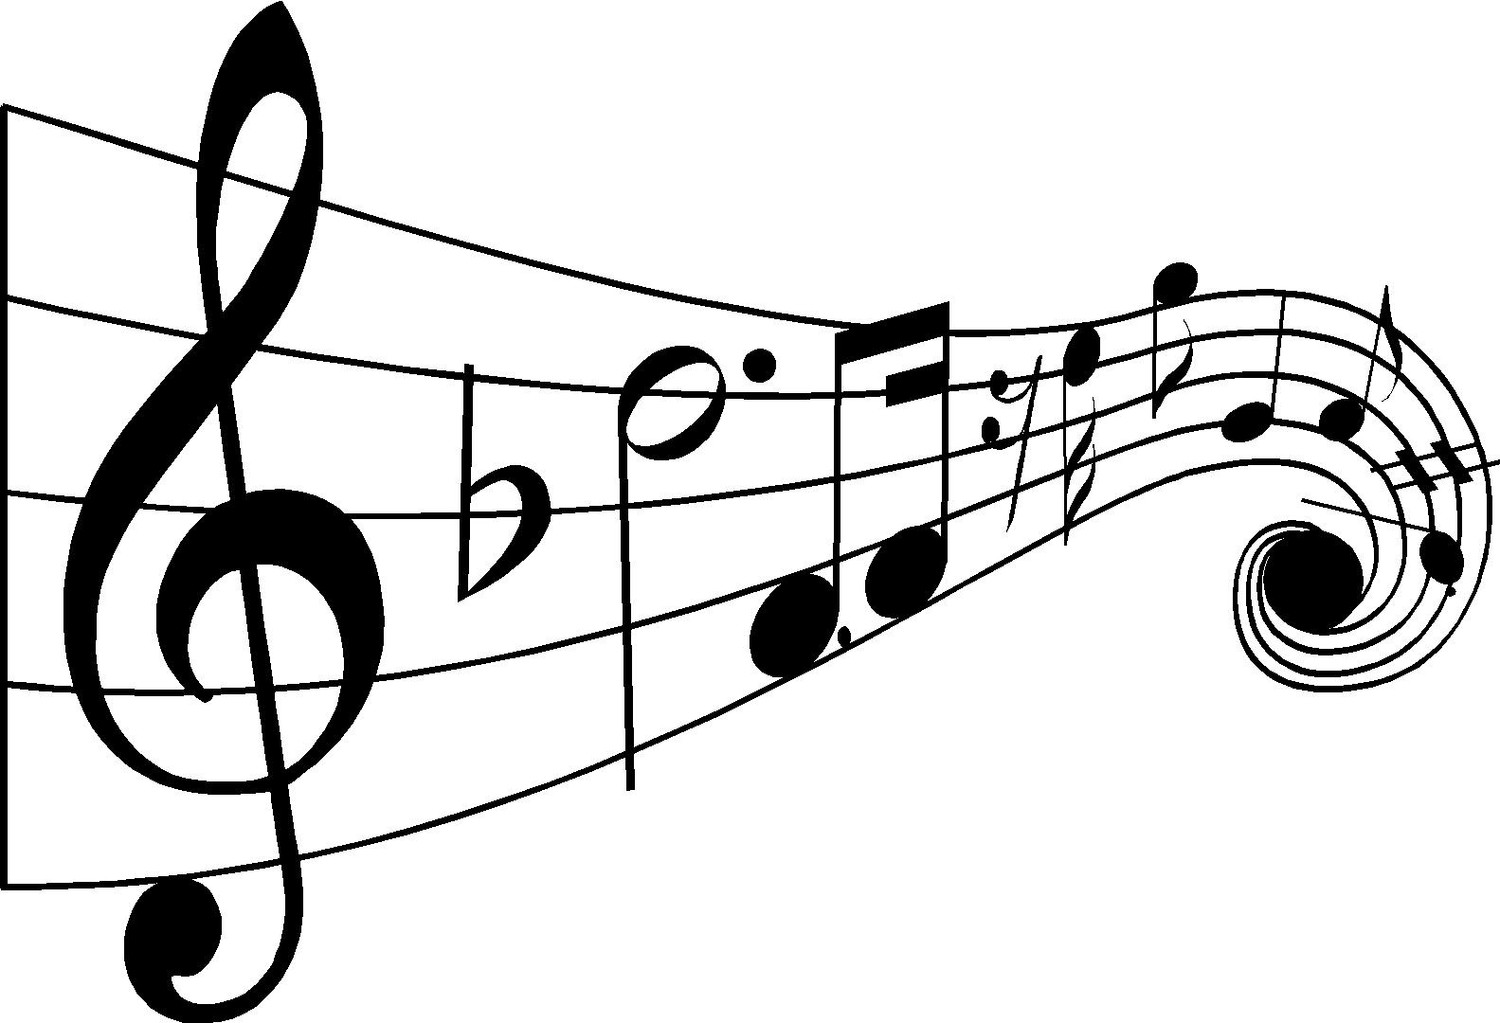 Music Notes Drawings - ClipArt Best